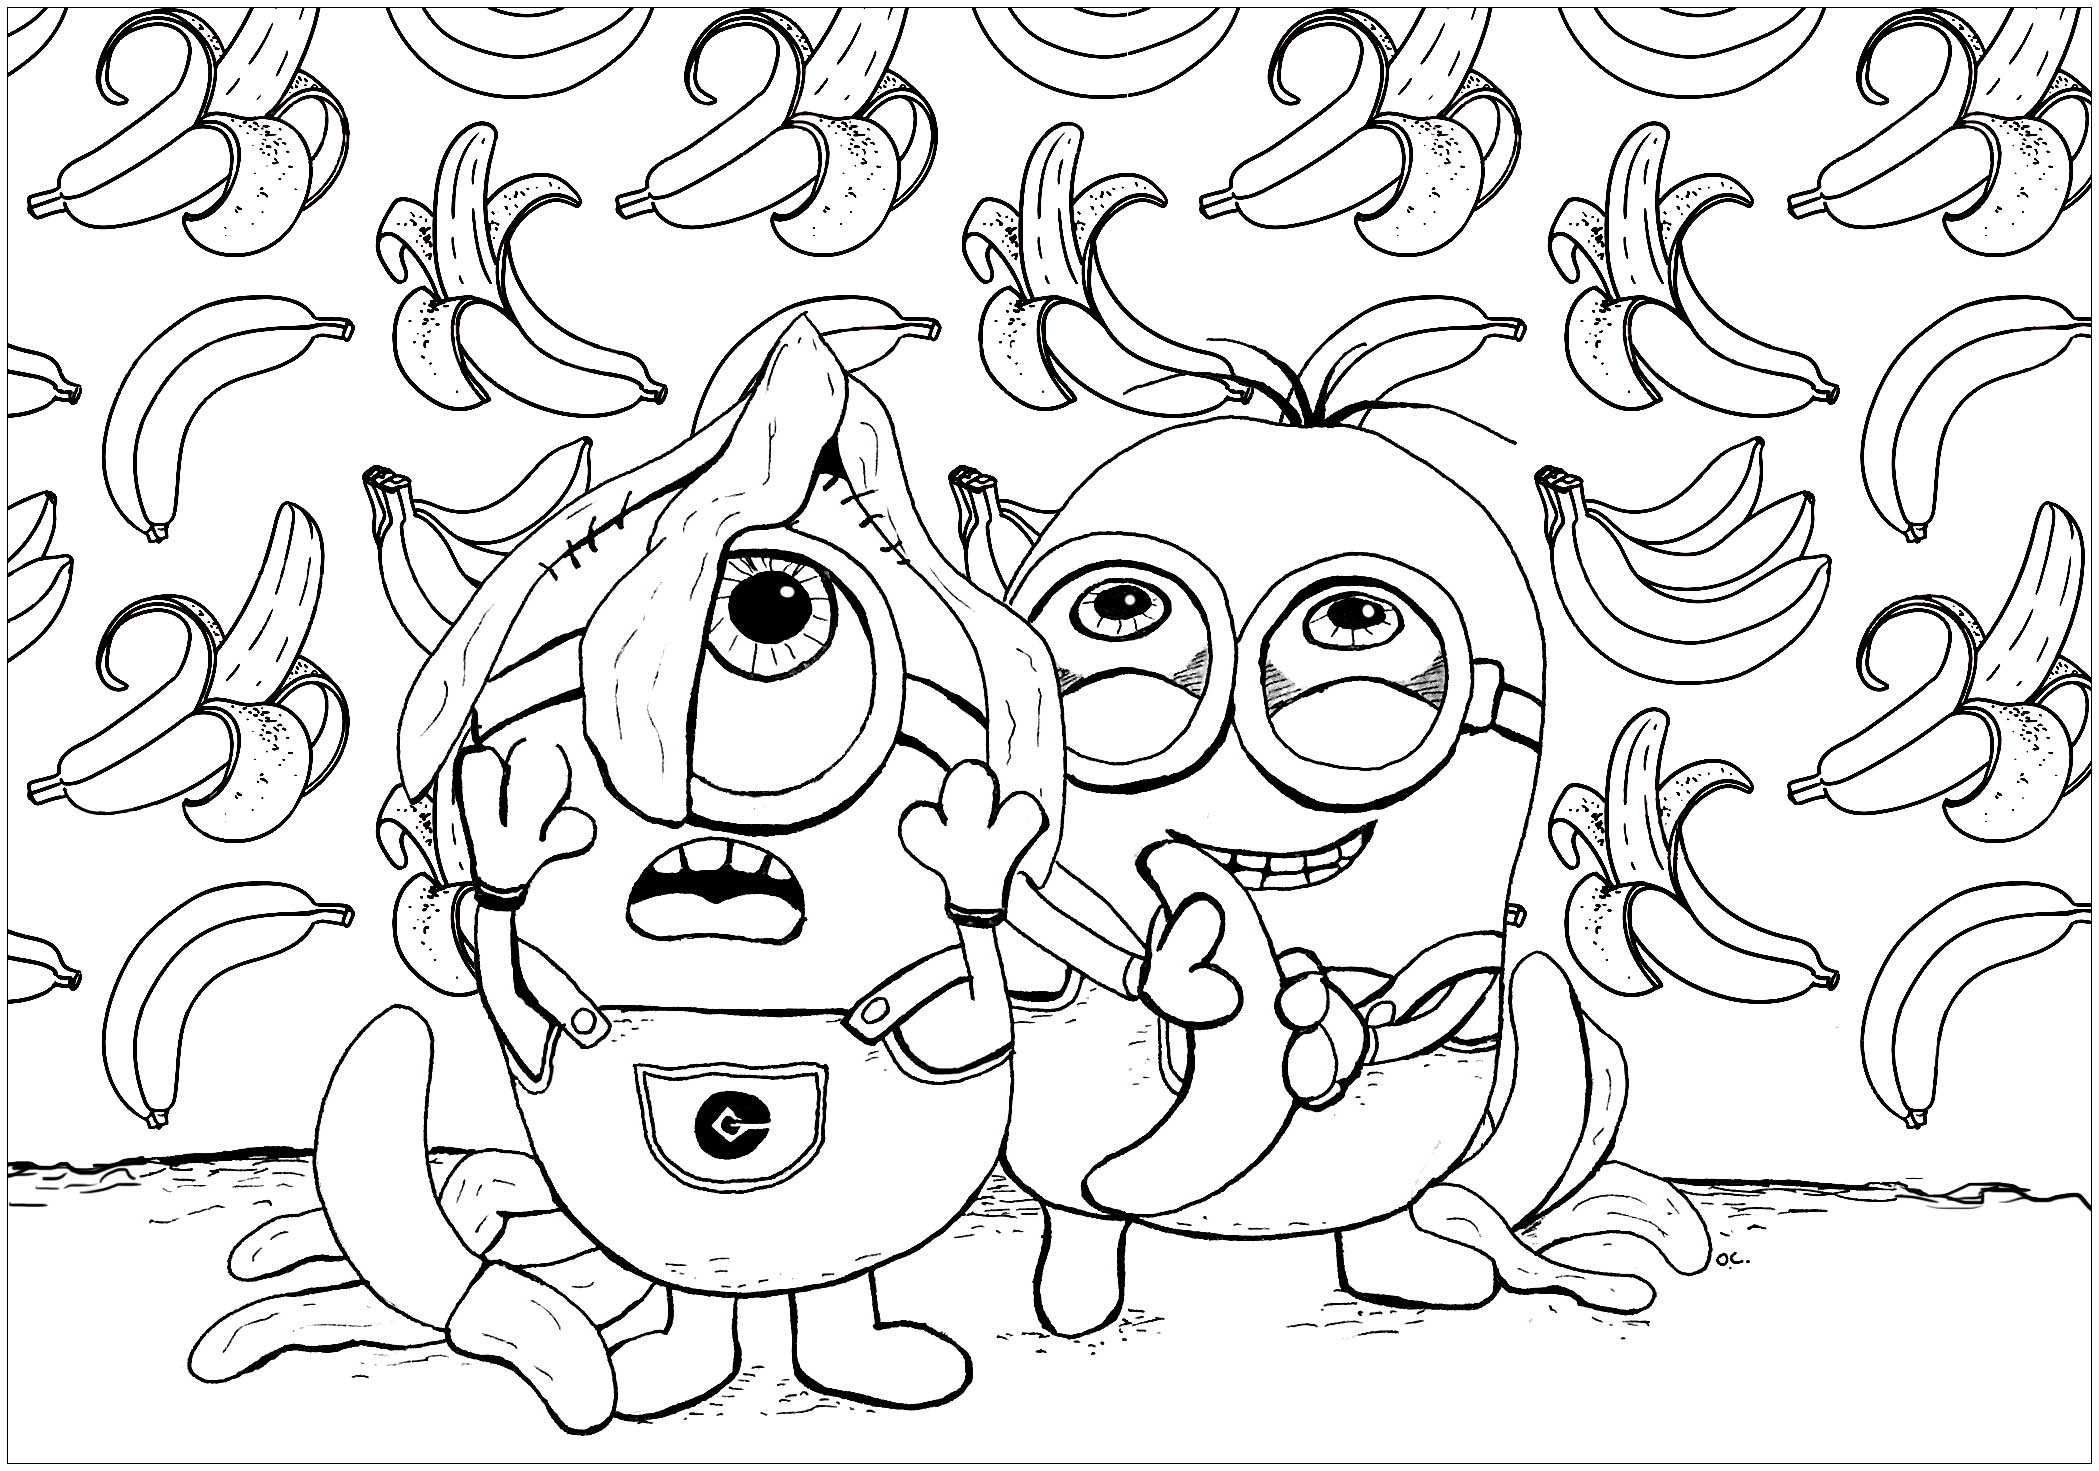 Minion & bananas falling from the sky - Minions Kids Coloring Pages